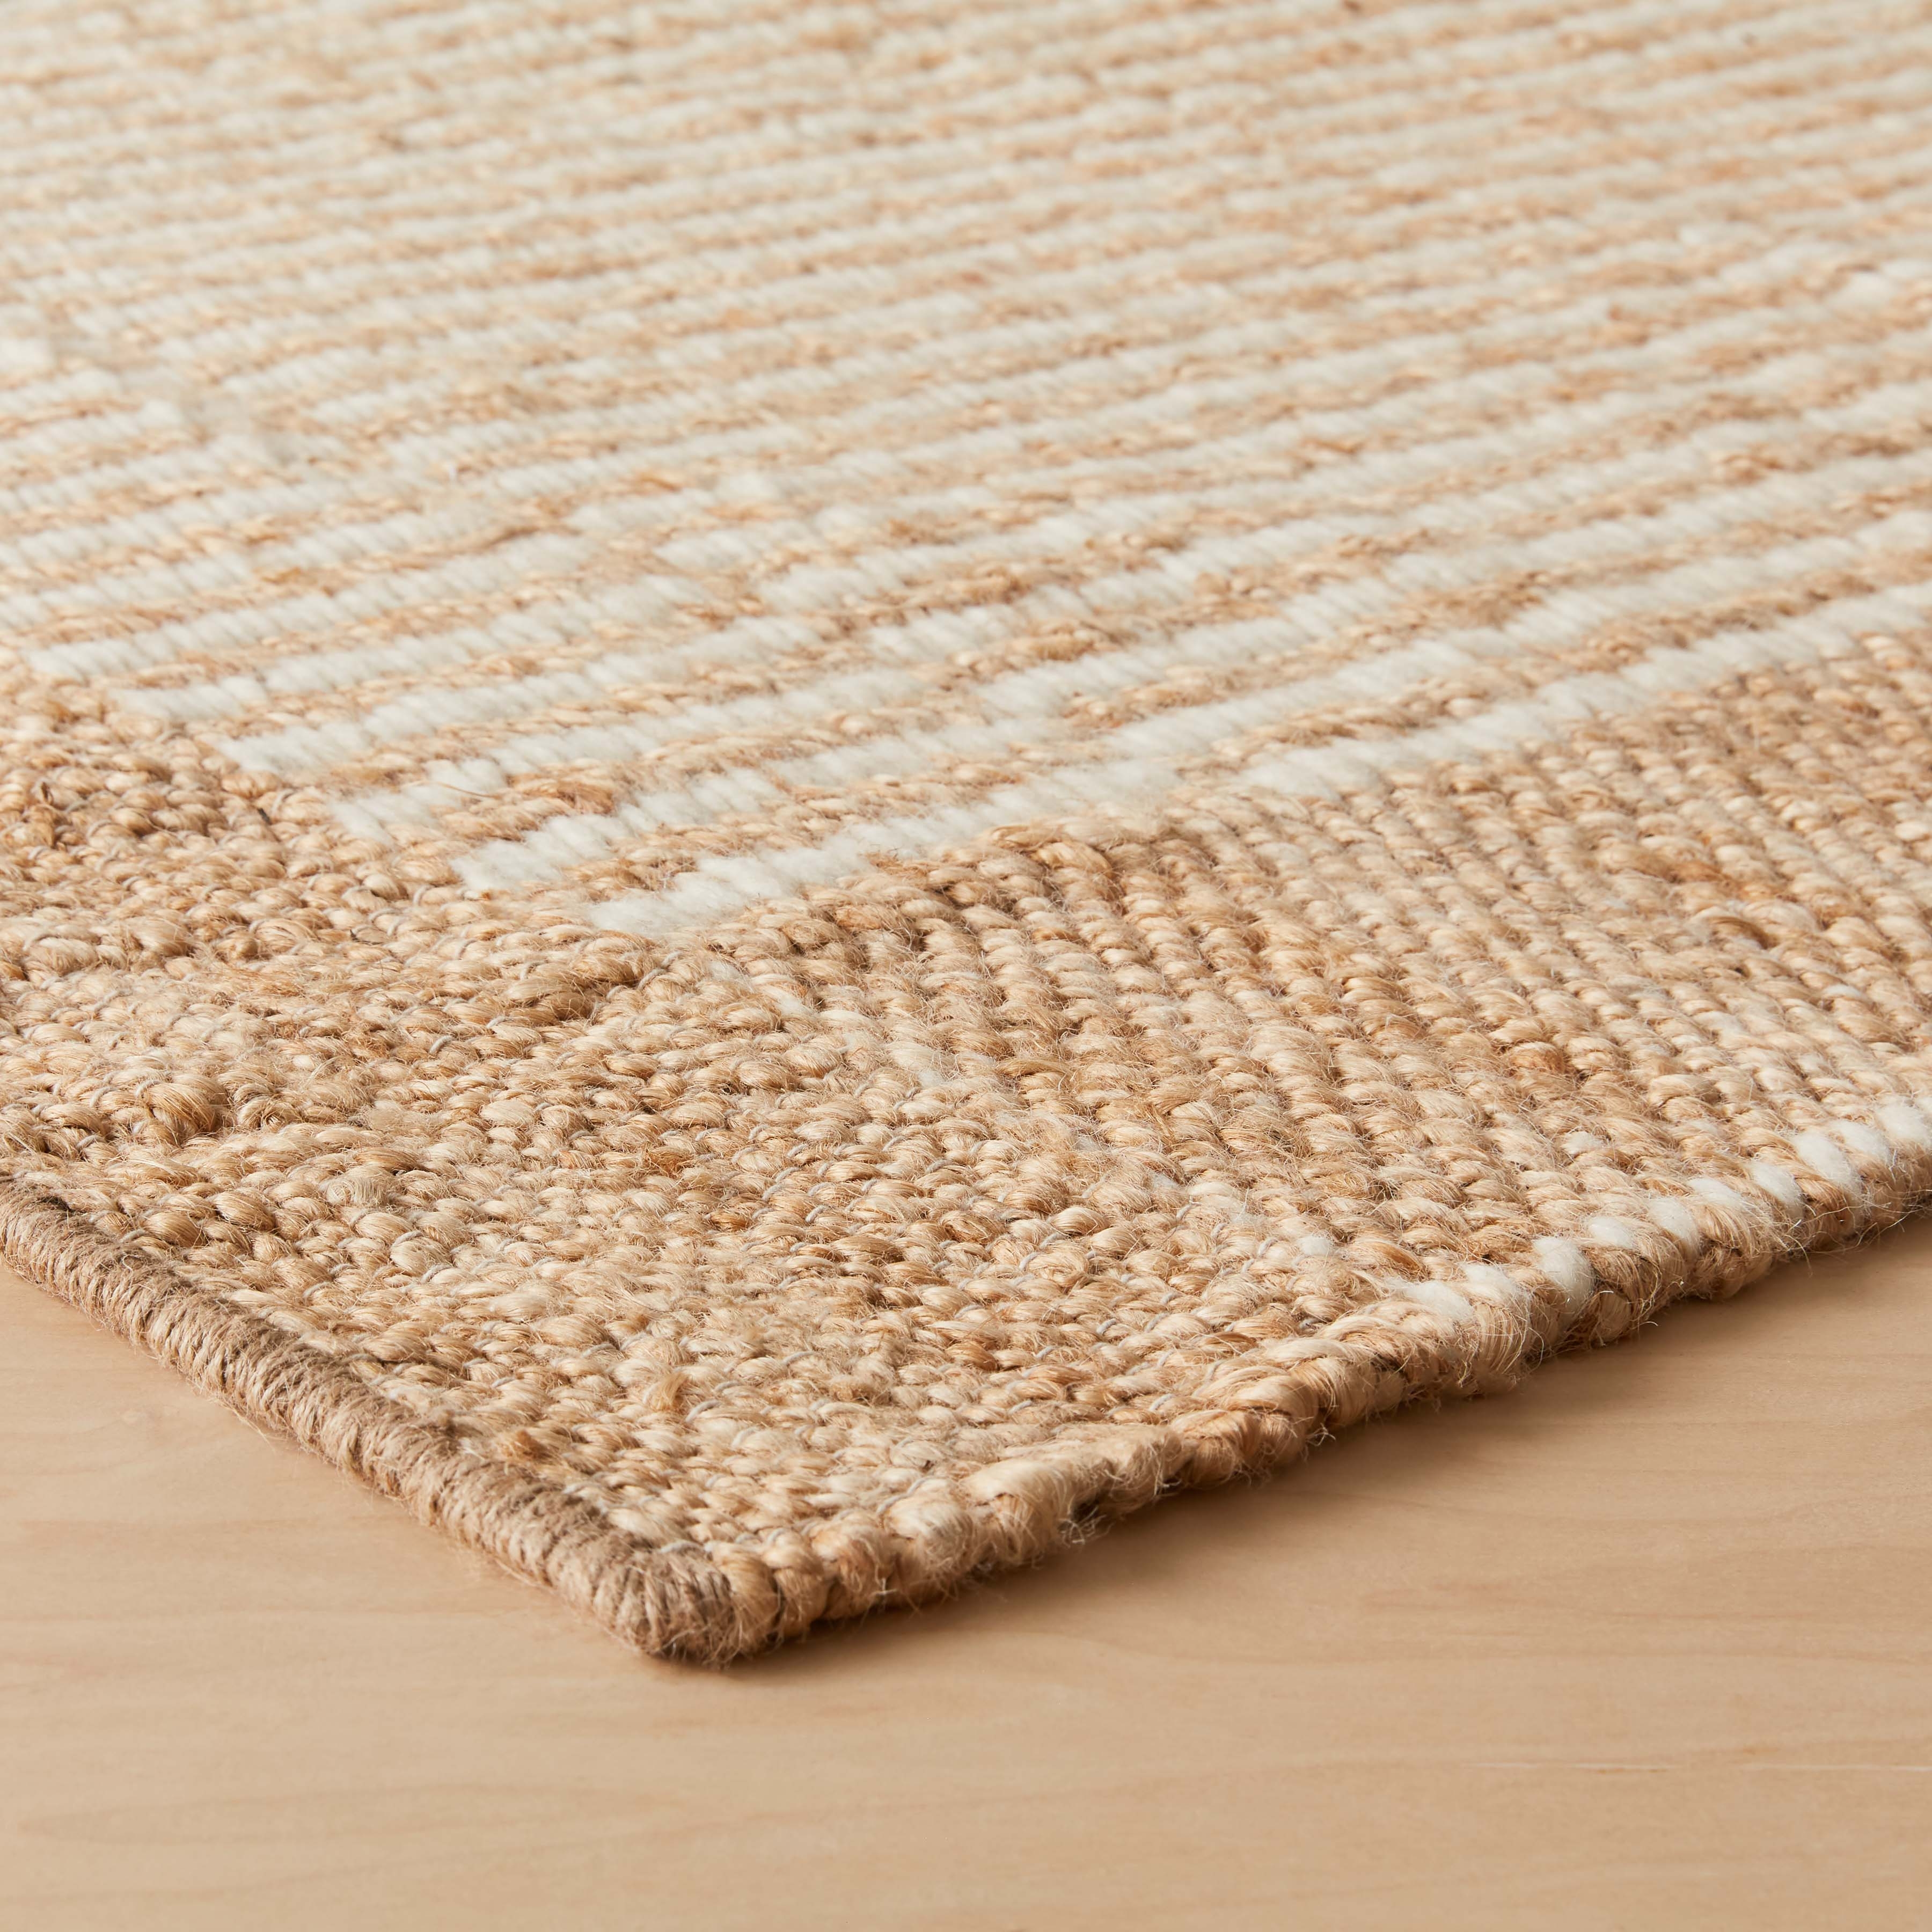 The Citizenry Anita Jute Area Rug | 5' x 8' | Natural - Image 2